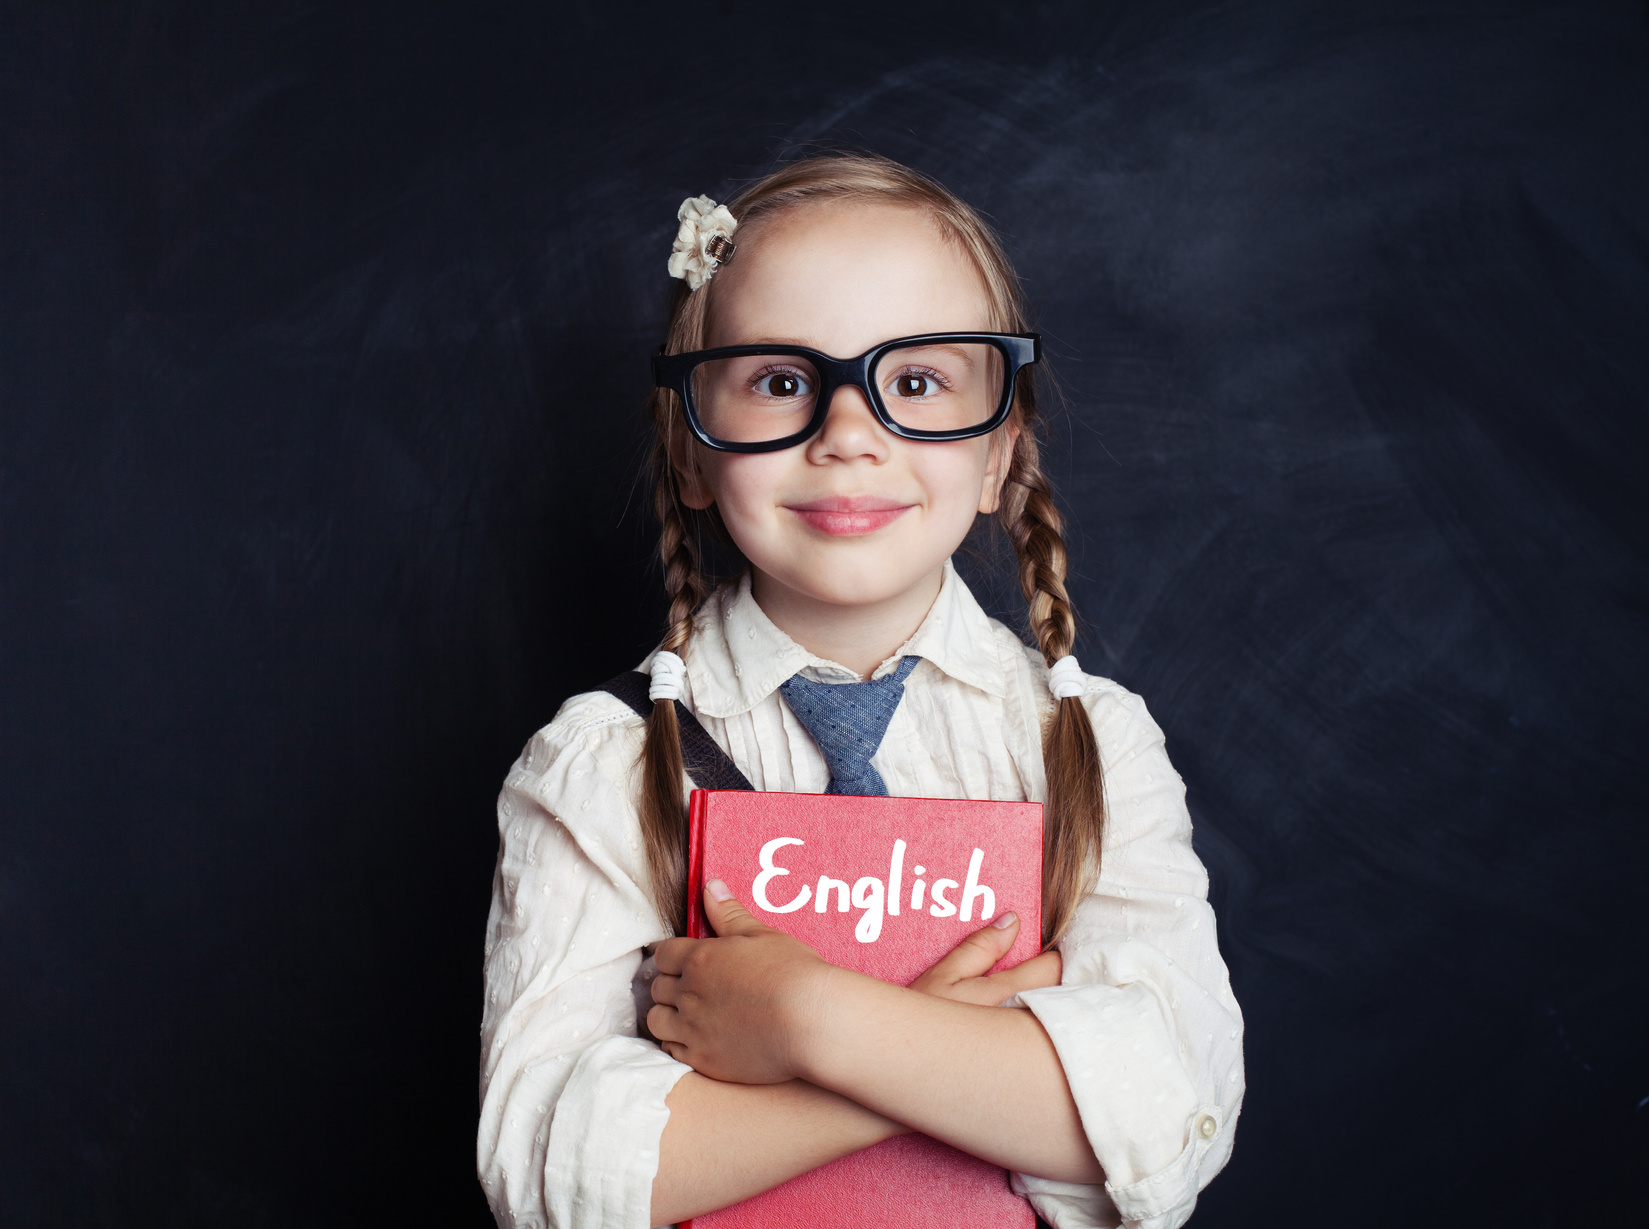 English concept with little schoolgirl student with pigtails and glasses. Smart kid learning english in language school